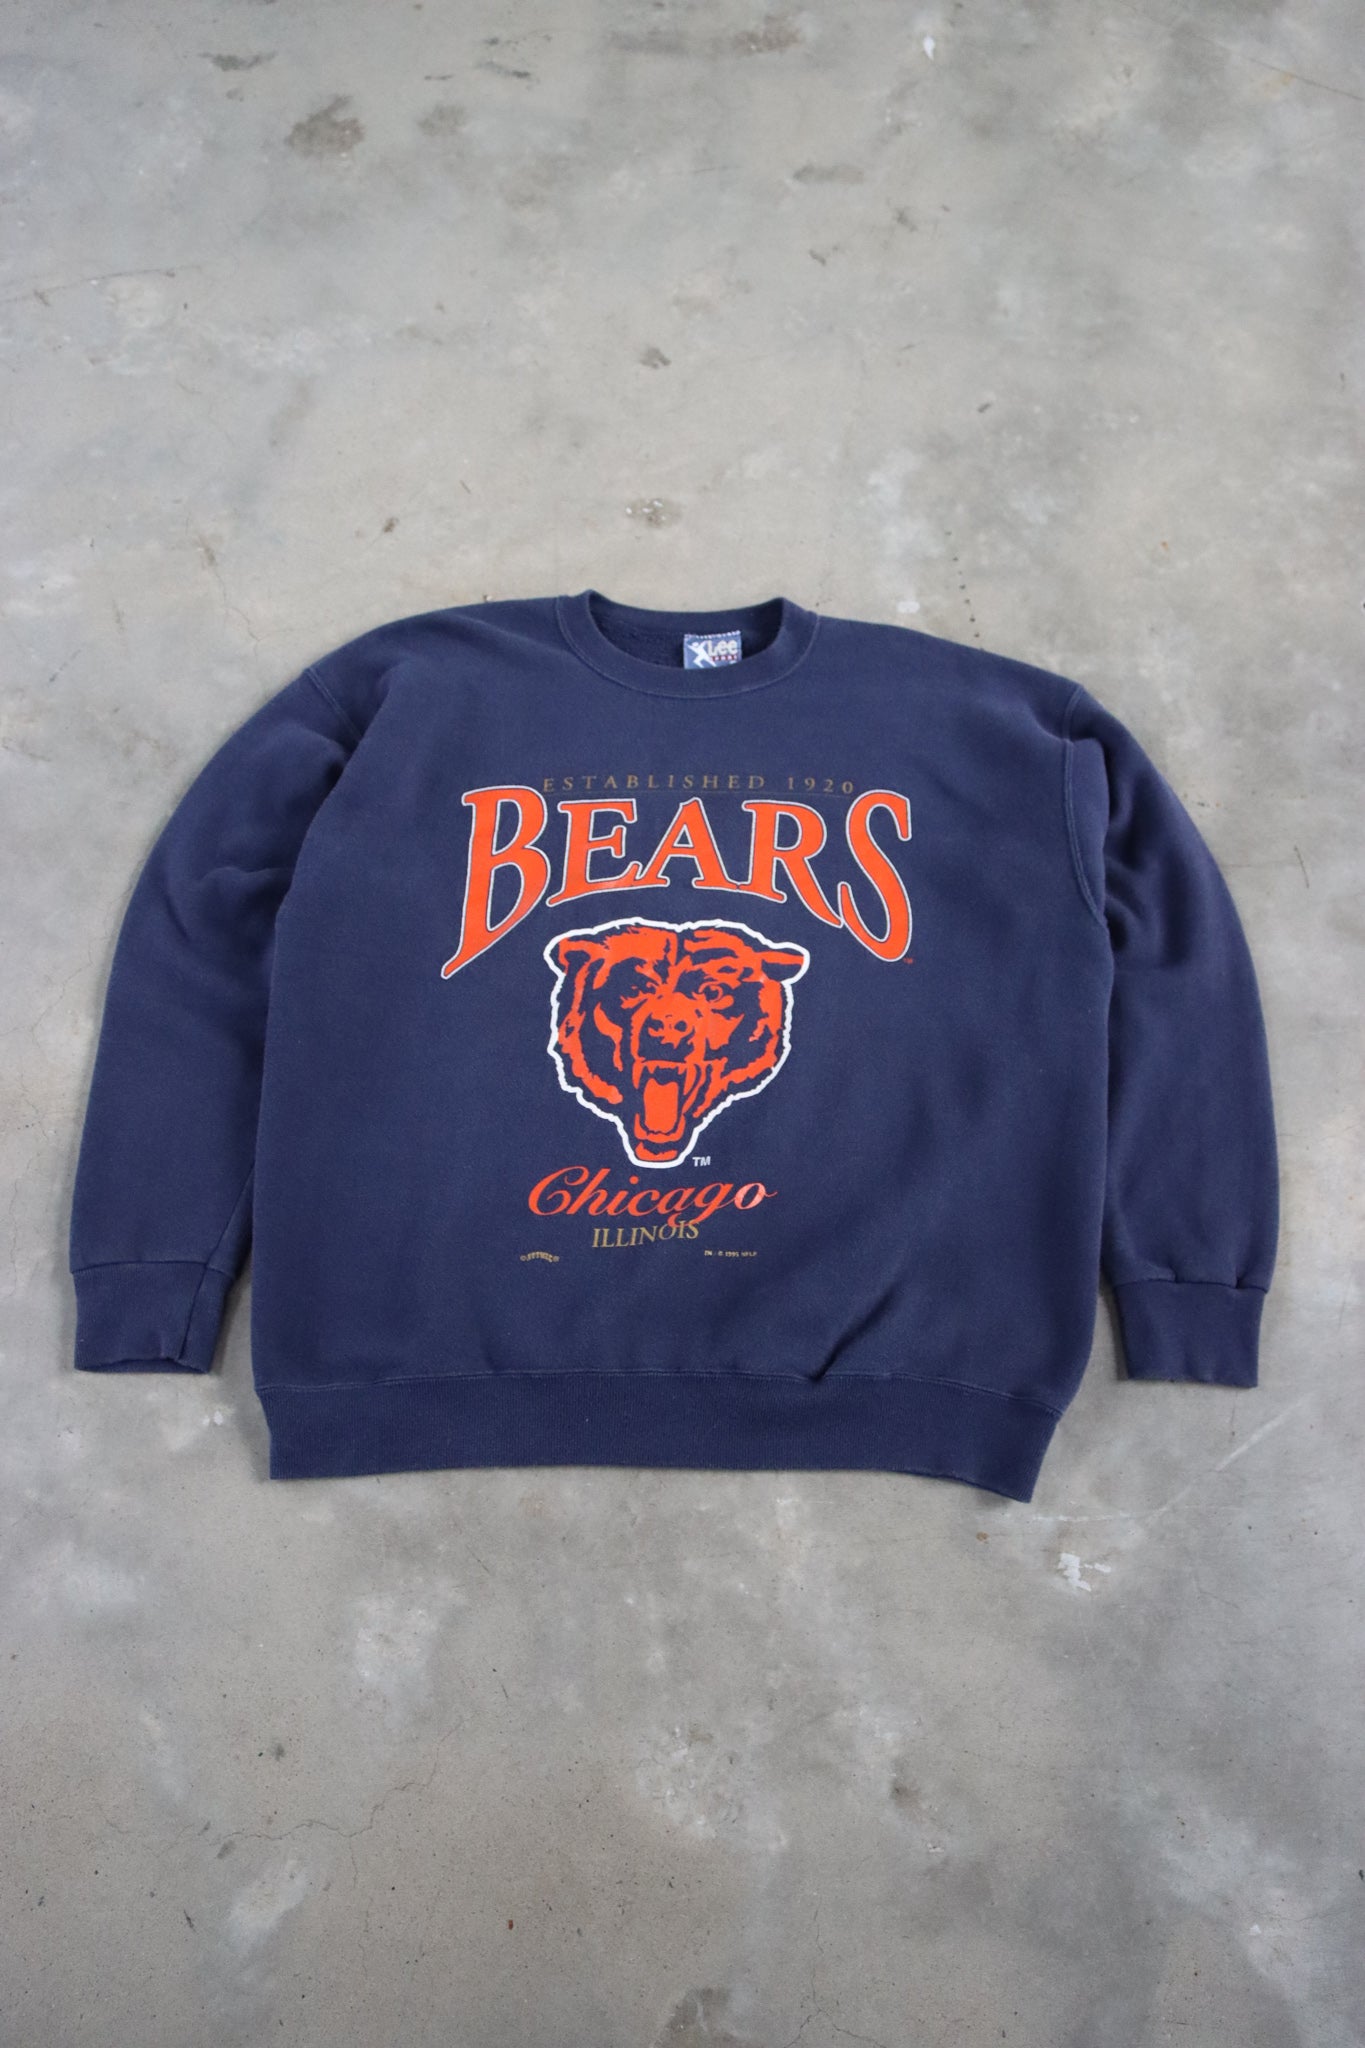 Vintage 1995 NFL Chicago Bears Sweater XL